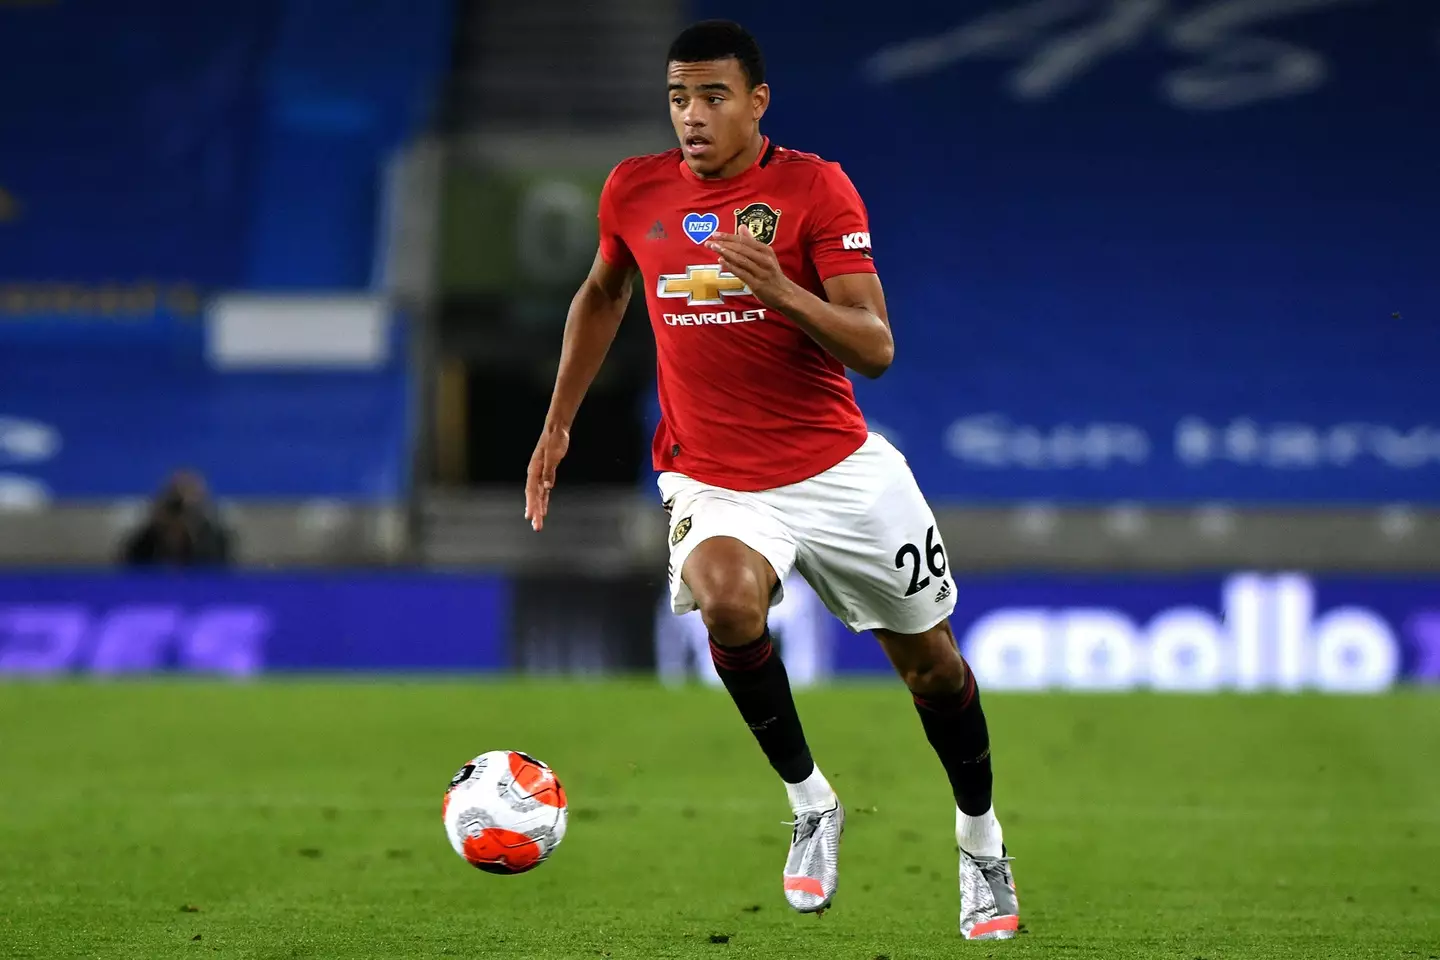 Greenwood issued a statement thanking family and loved ones for their support, though he has not yet been readmitted to training at Manchester United.